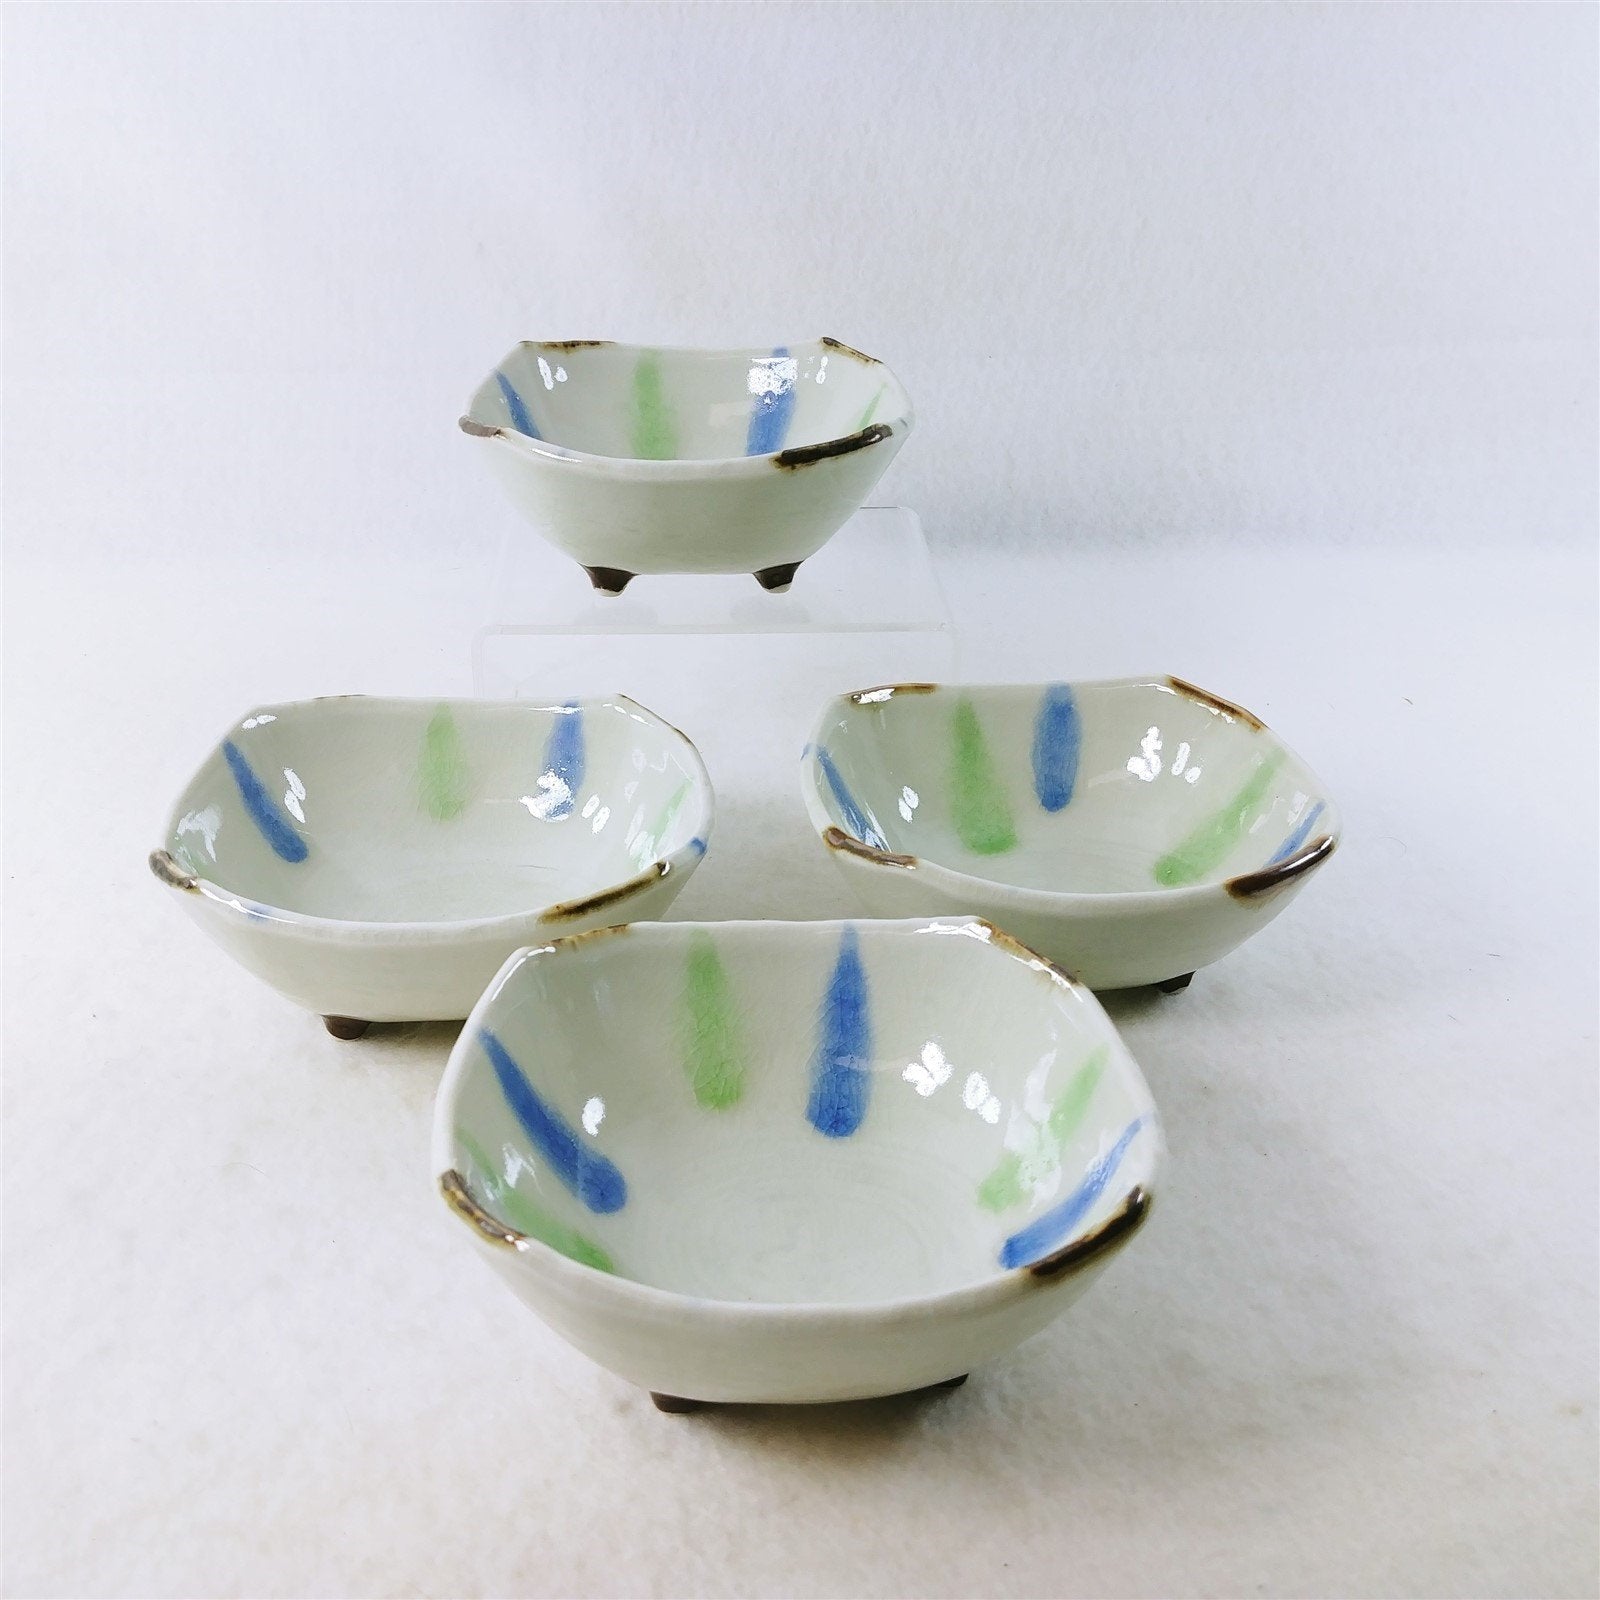 Footed Bowls Gold Corner Accents Ceramic Set of 4